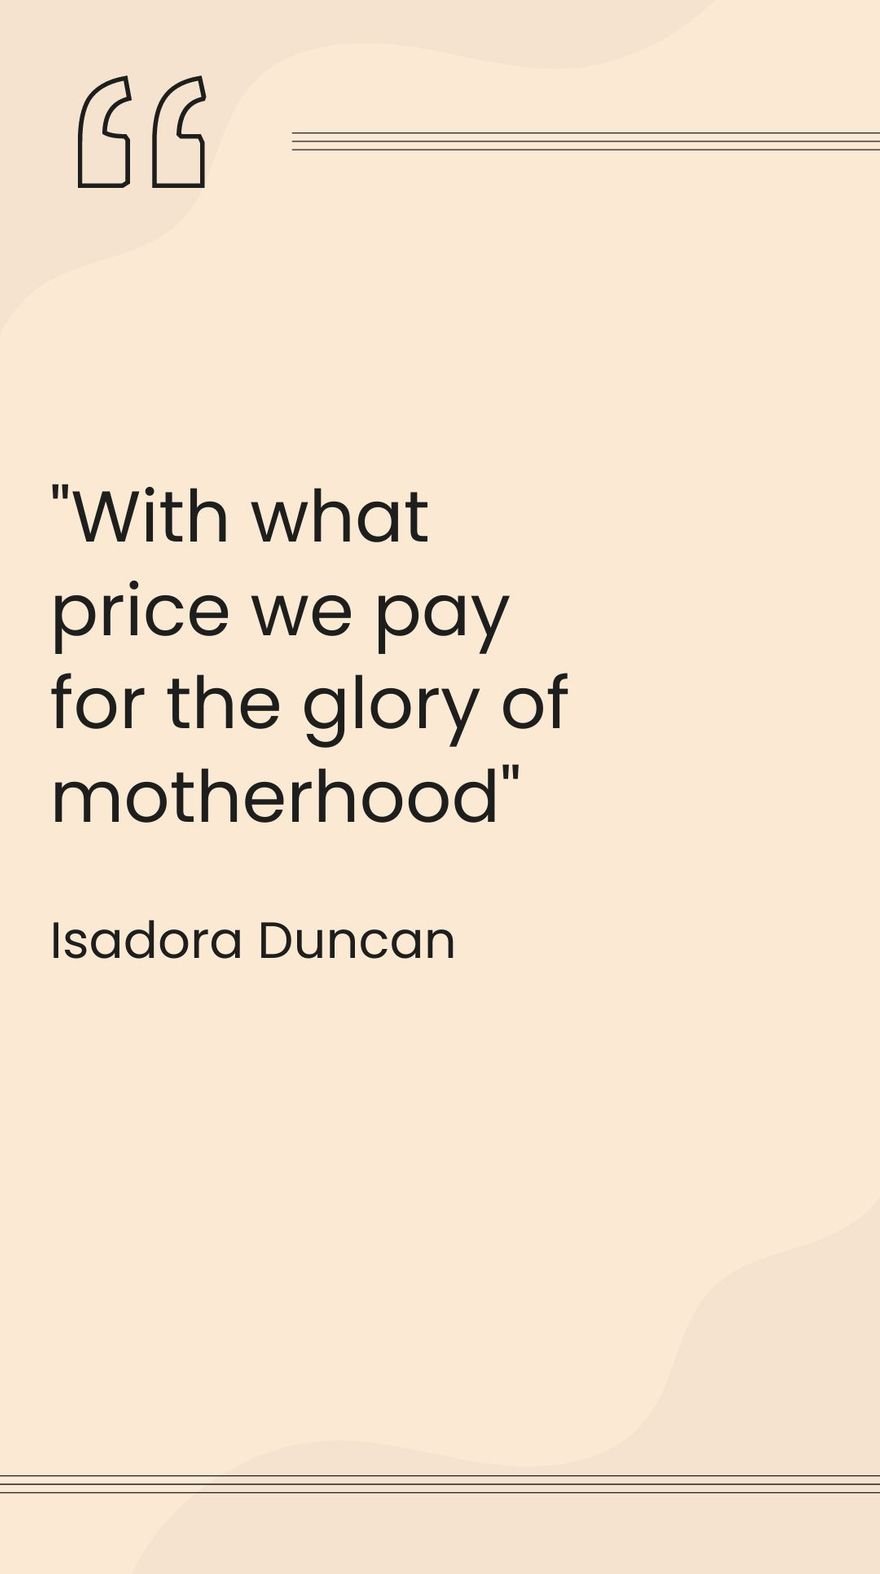 Isadora Duncan - With what price we pay for the glory of motherhood. 